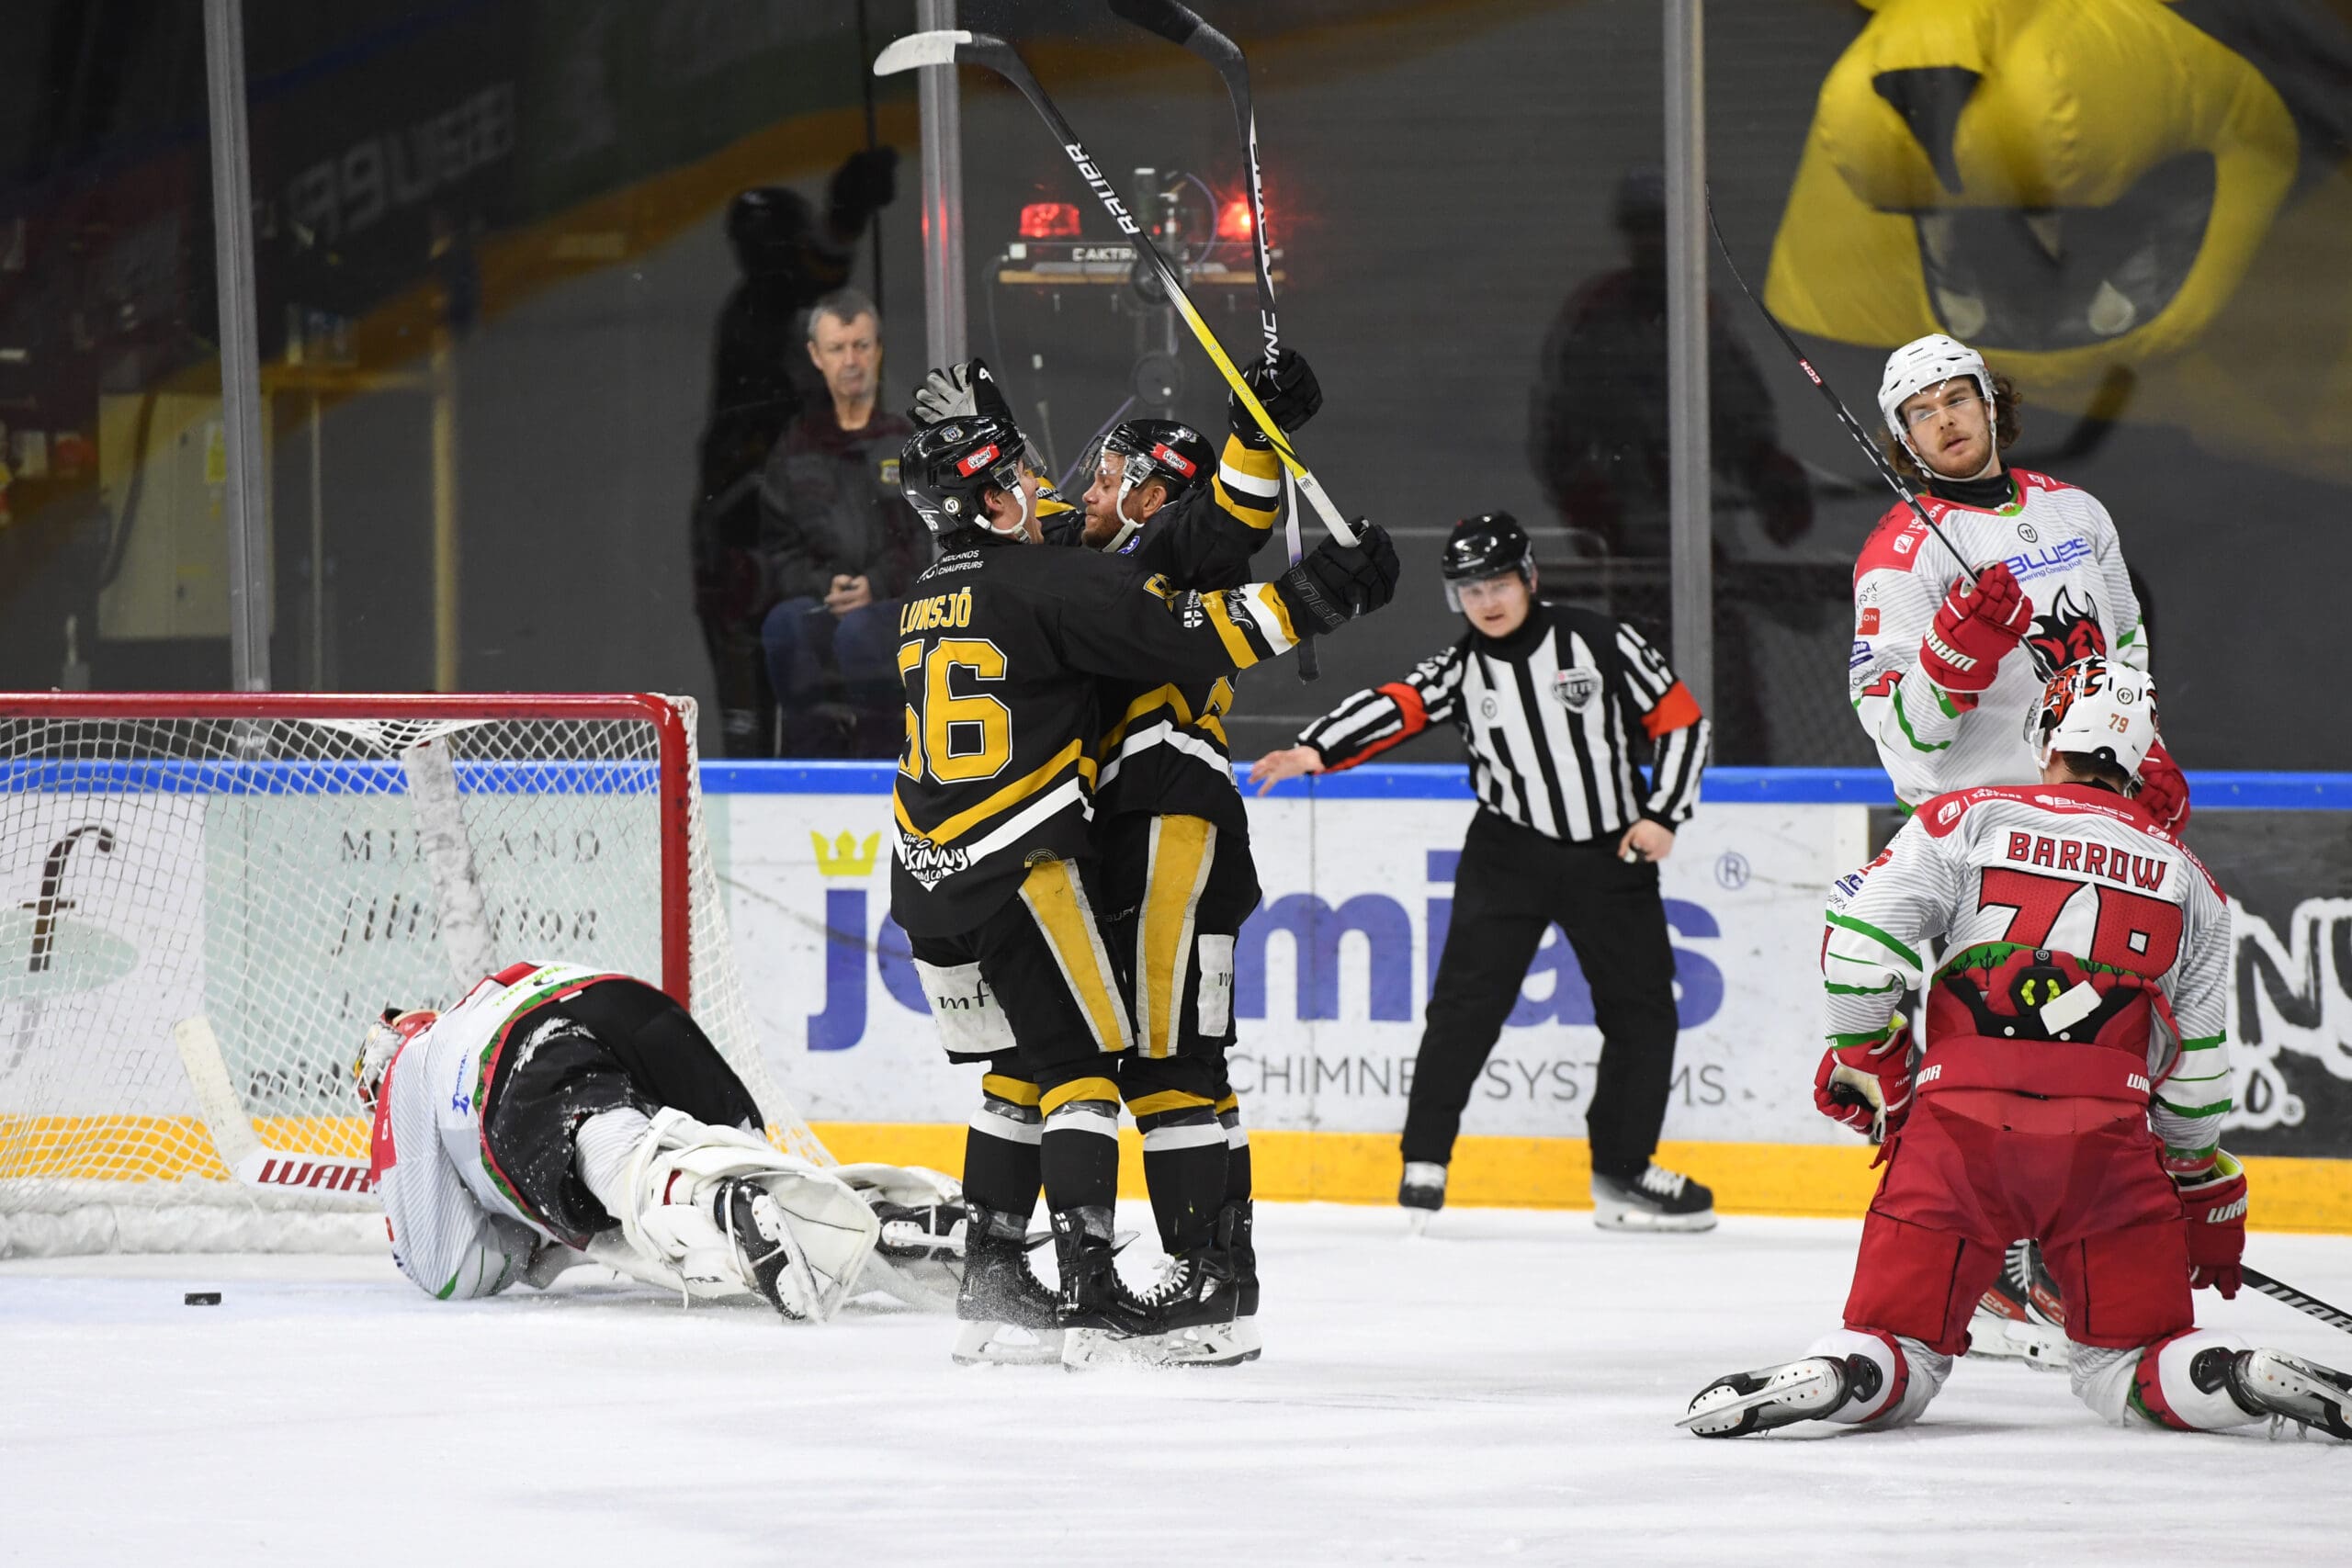 playoff Alexander Lunsjö, Nottingham Panthers (Image: Panthers Images)